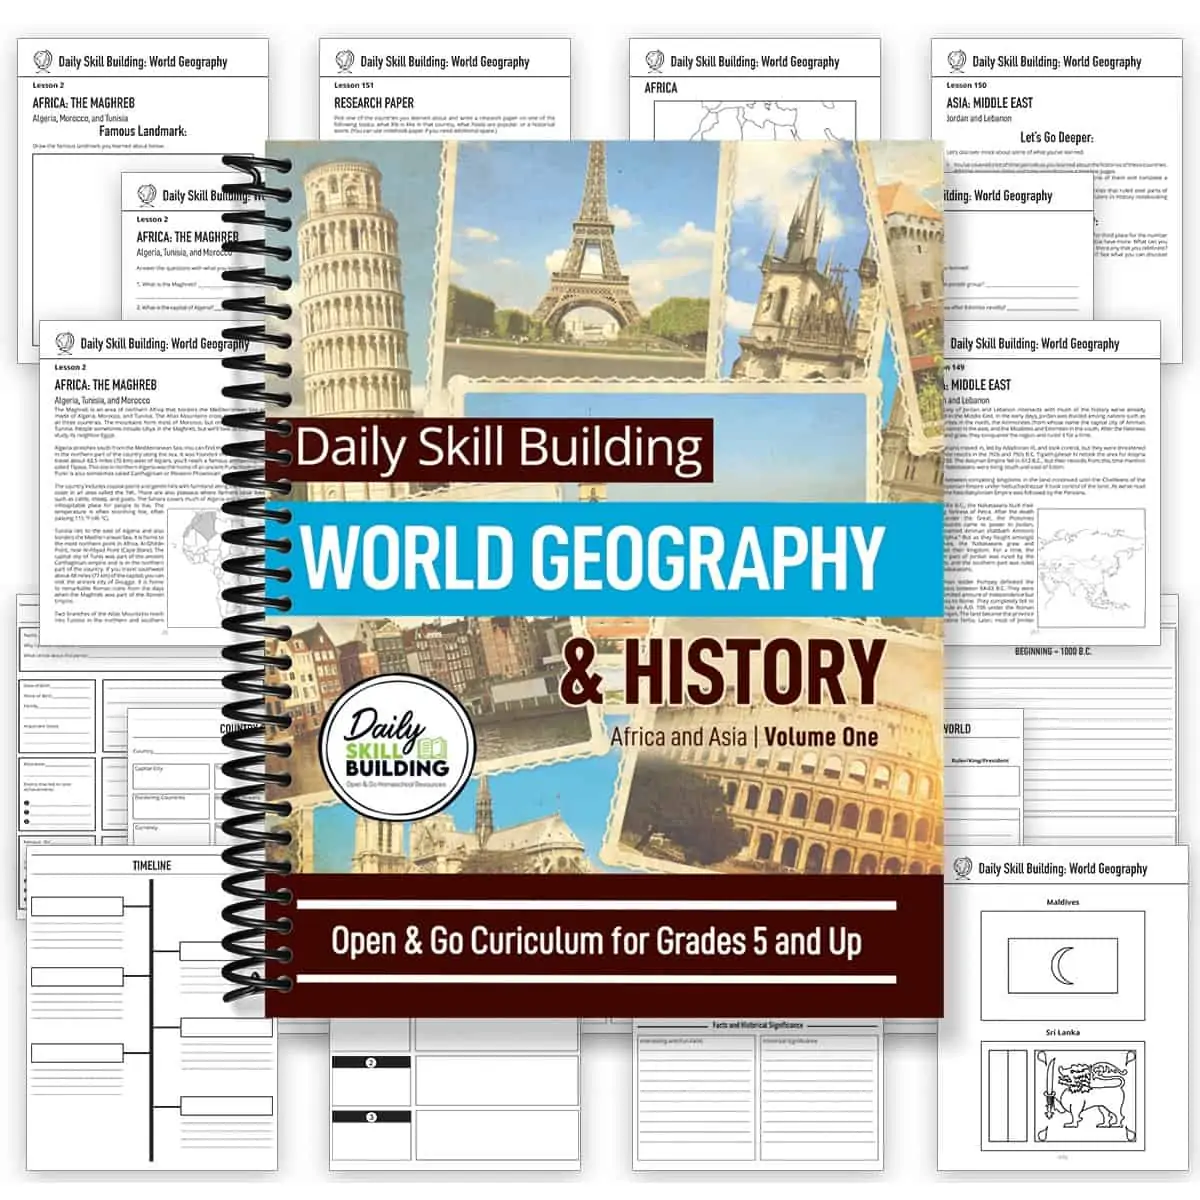 Daily Skills Building World Geography and History workbook and worksheets